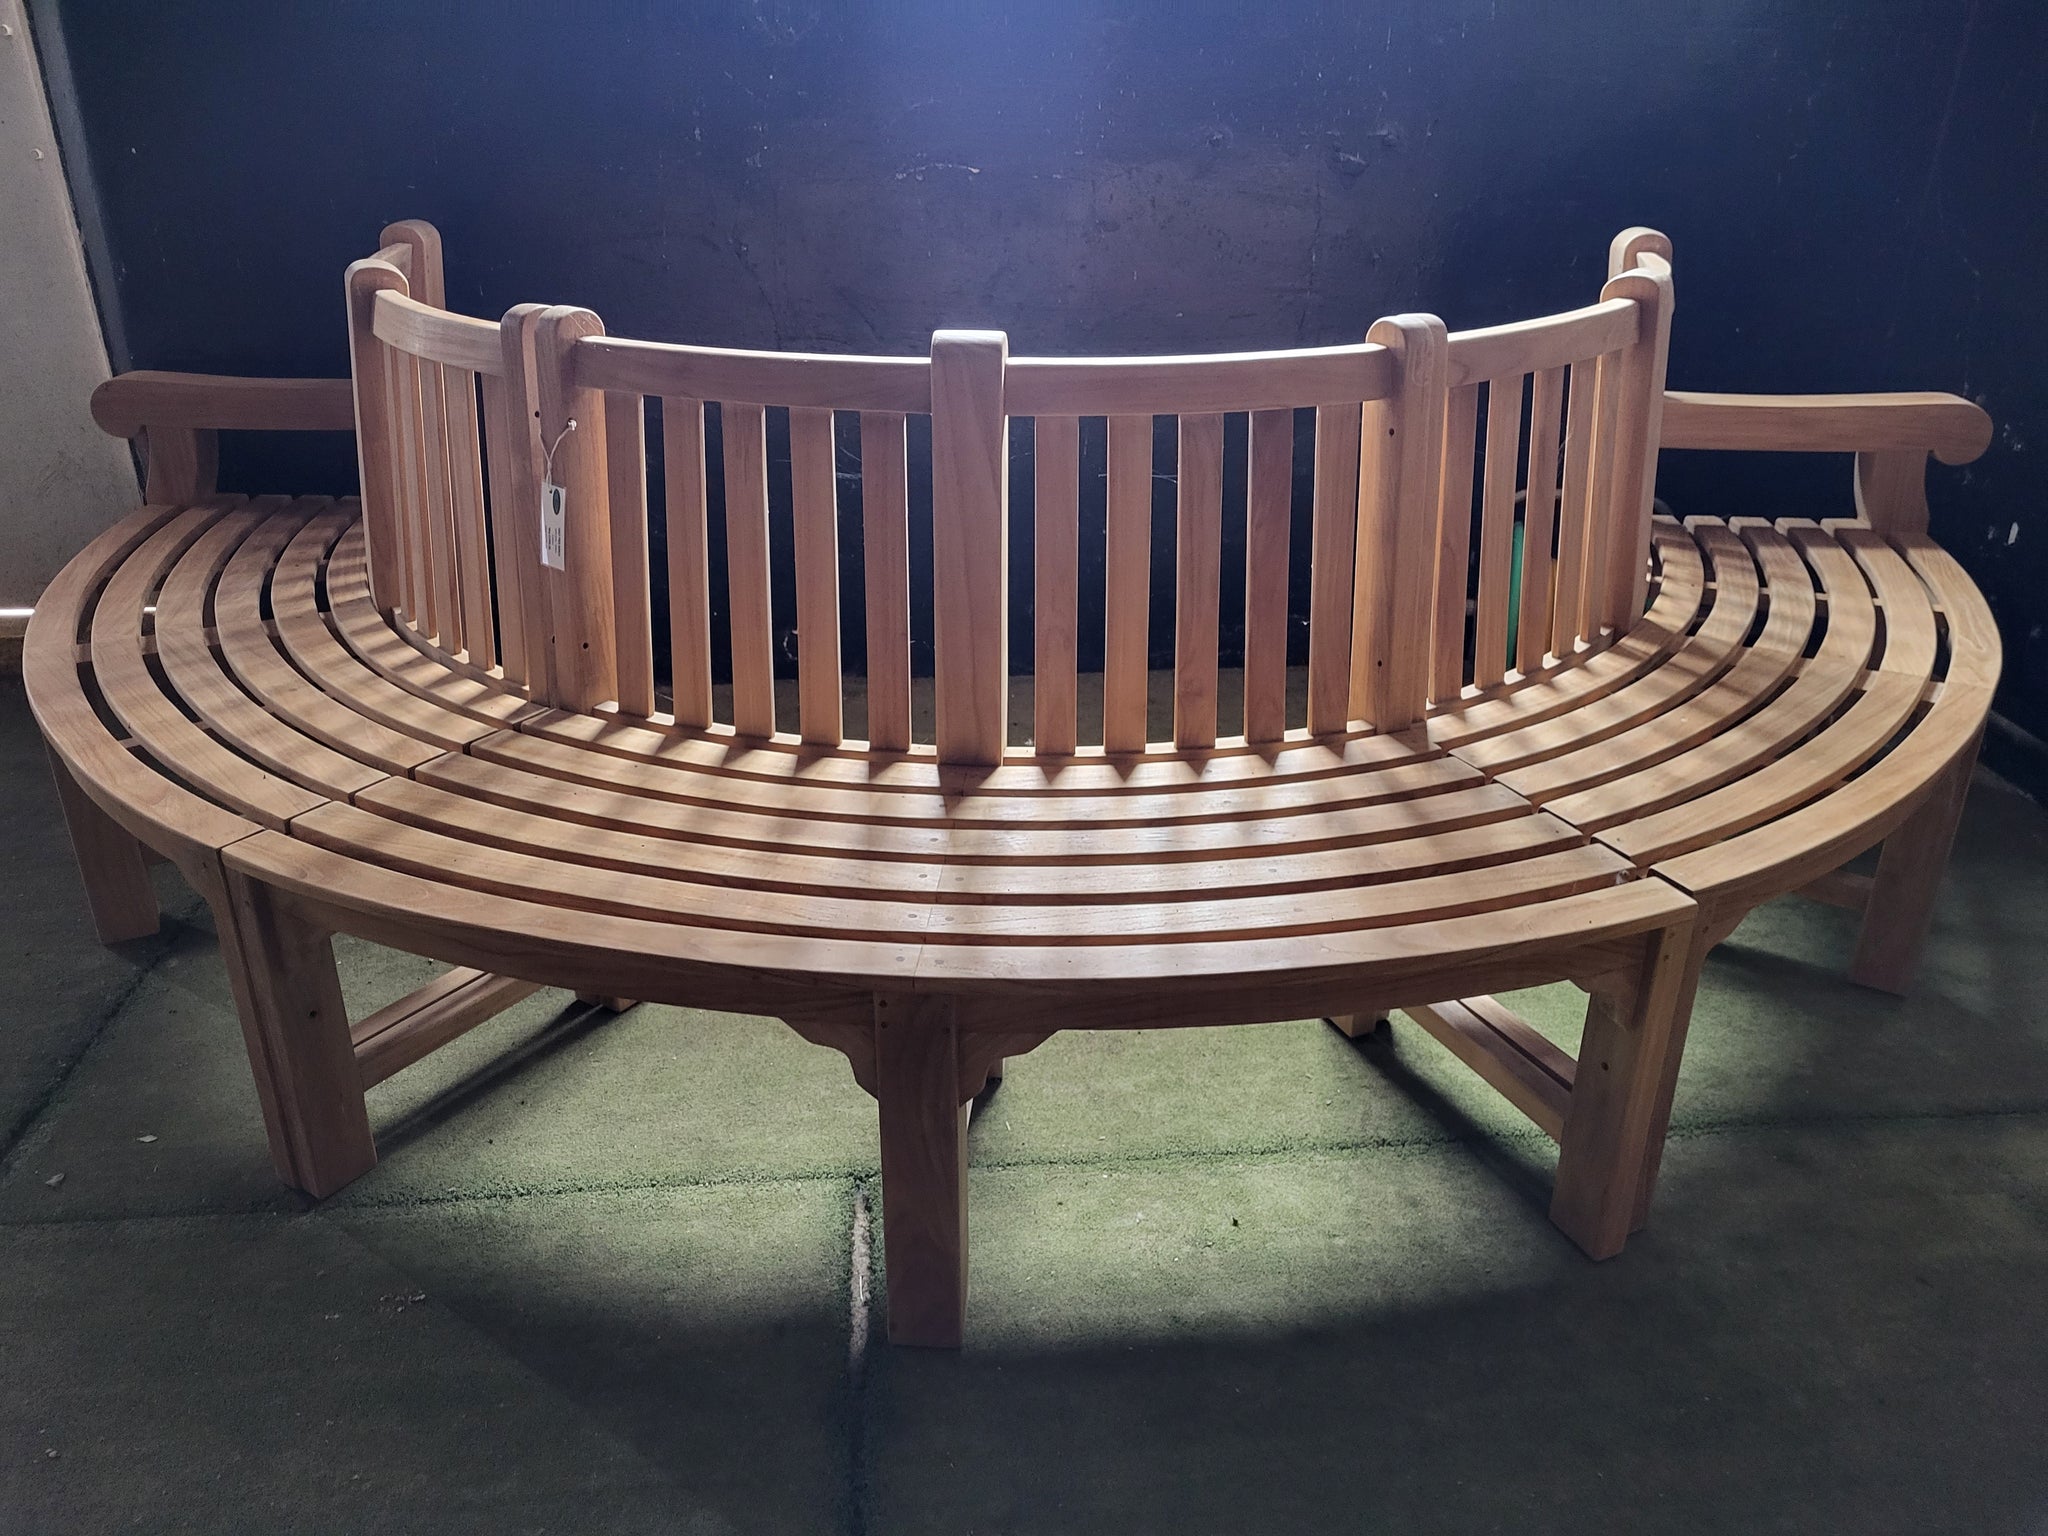 SALE - Semi-Circular Tree Bench with arms 193cm (23019)